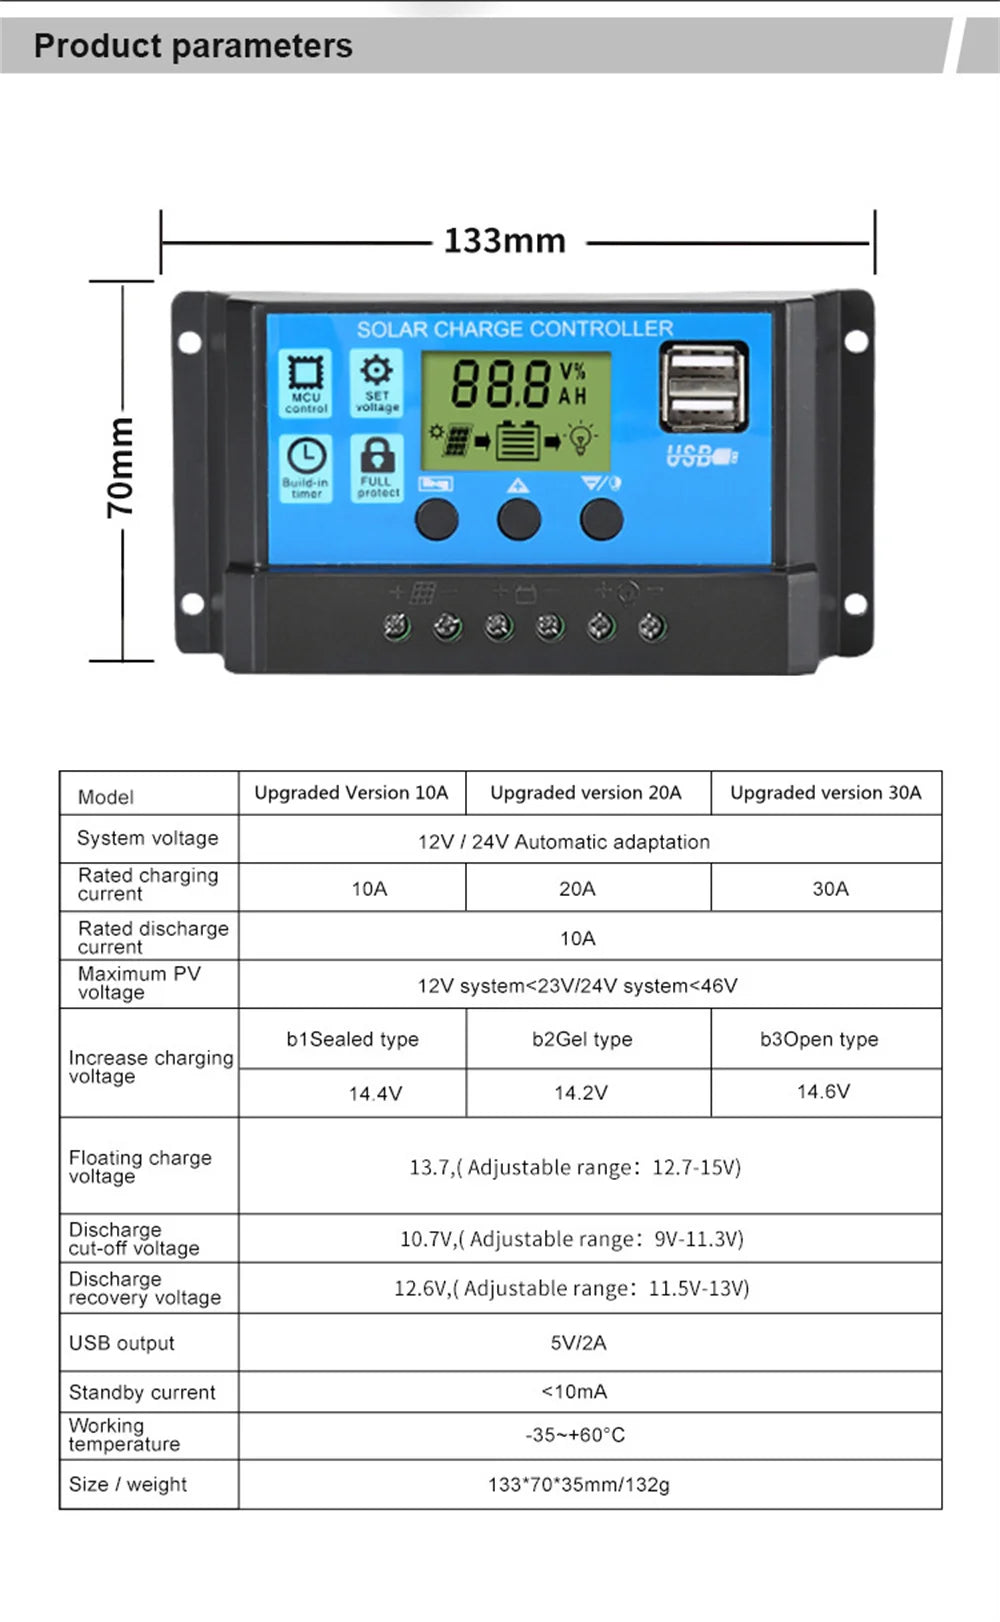 Upgraded 10A 20A 30A Solar Controller, Solar controller with upgraded features for 12V/24V auto solar panel charging, battery regulation and dual USB output.